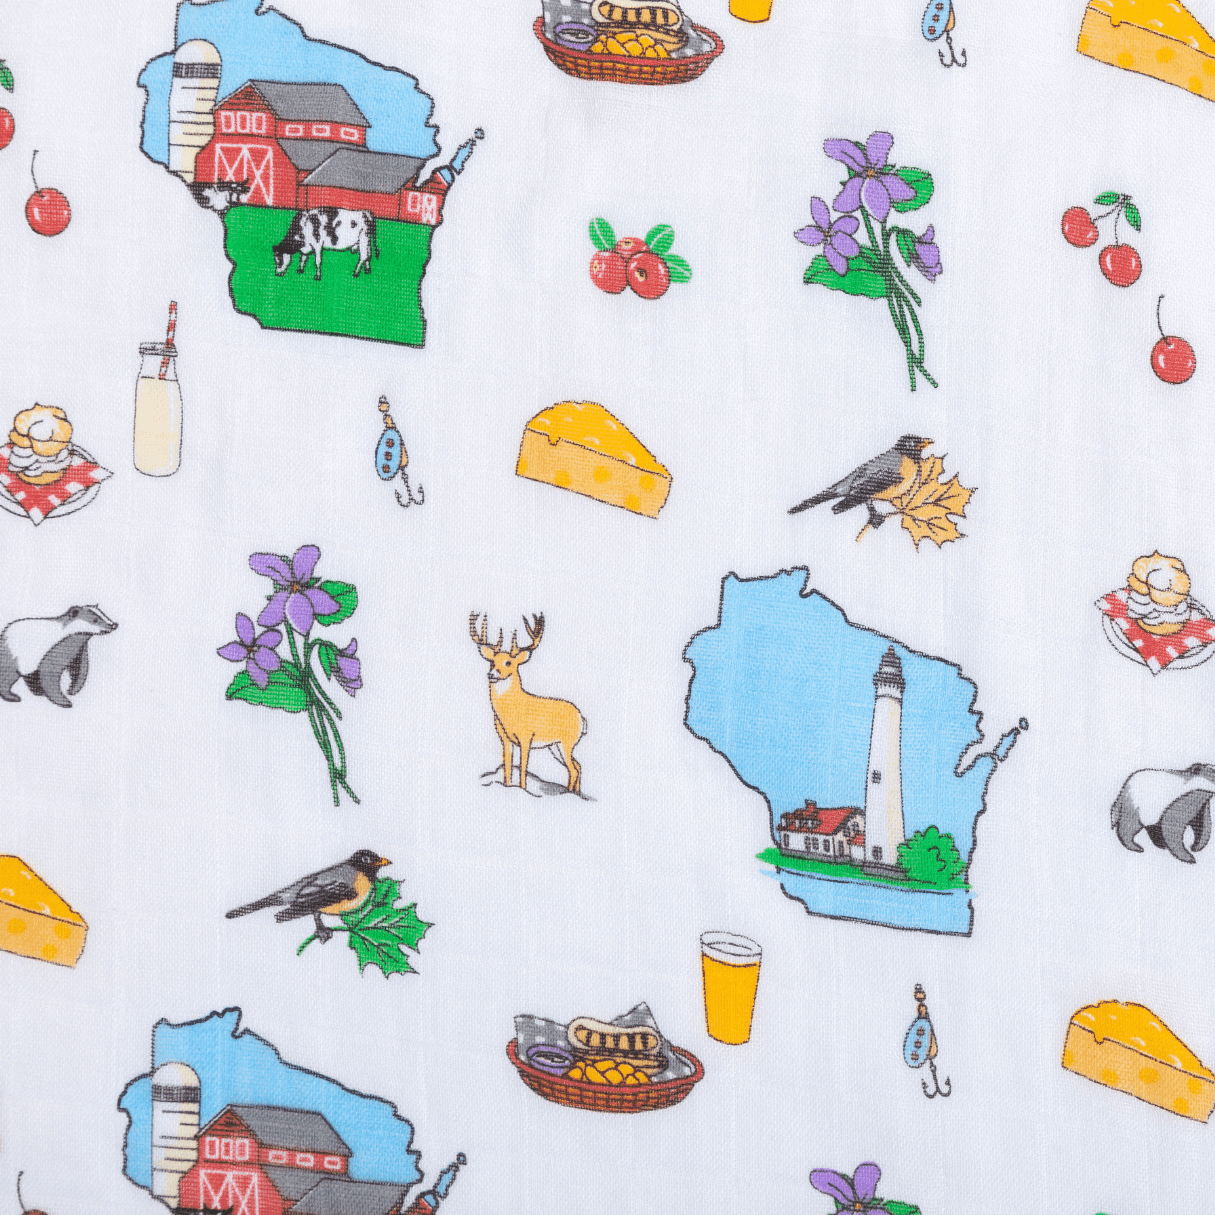 White muslin swaddle blanket with a colorful map of Wisconsin, featuring landmarks and playful illustrations.